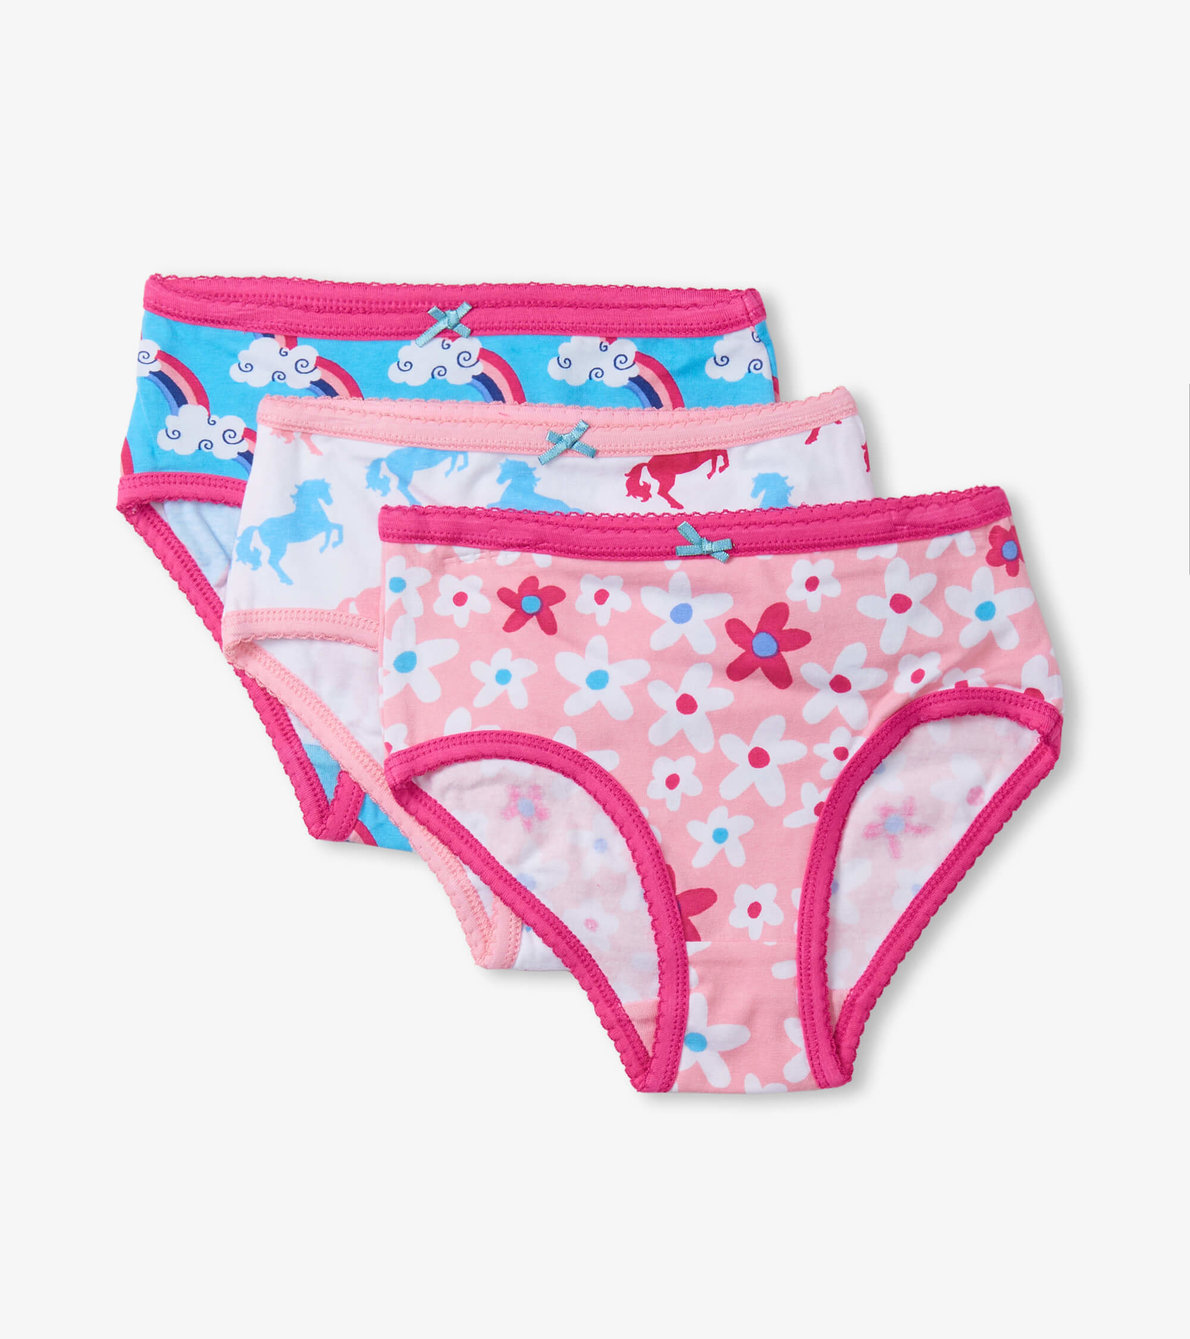 View larger image of Fun Prints Girls Brief Underwear 3 Pack